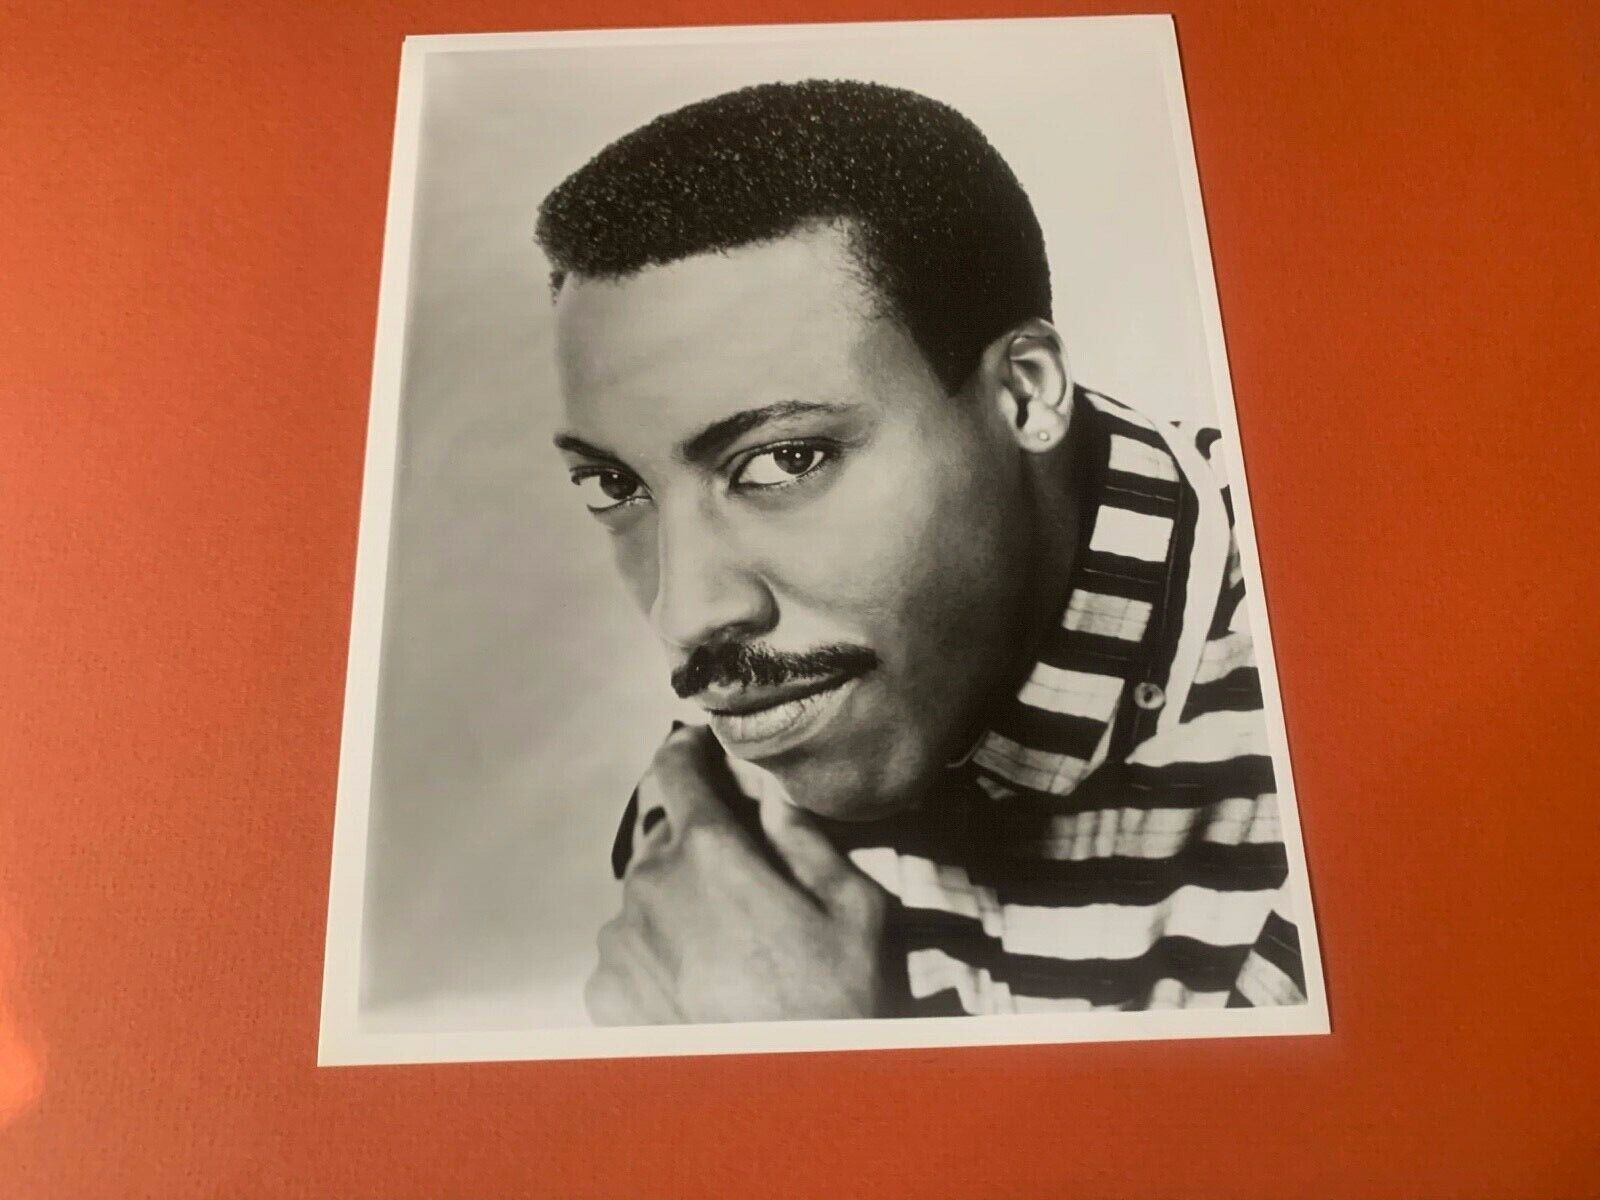 Arsenio Hall Comedian Unsigned Vintage Publicity Photo Size 8x10 B&W Photo